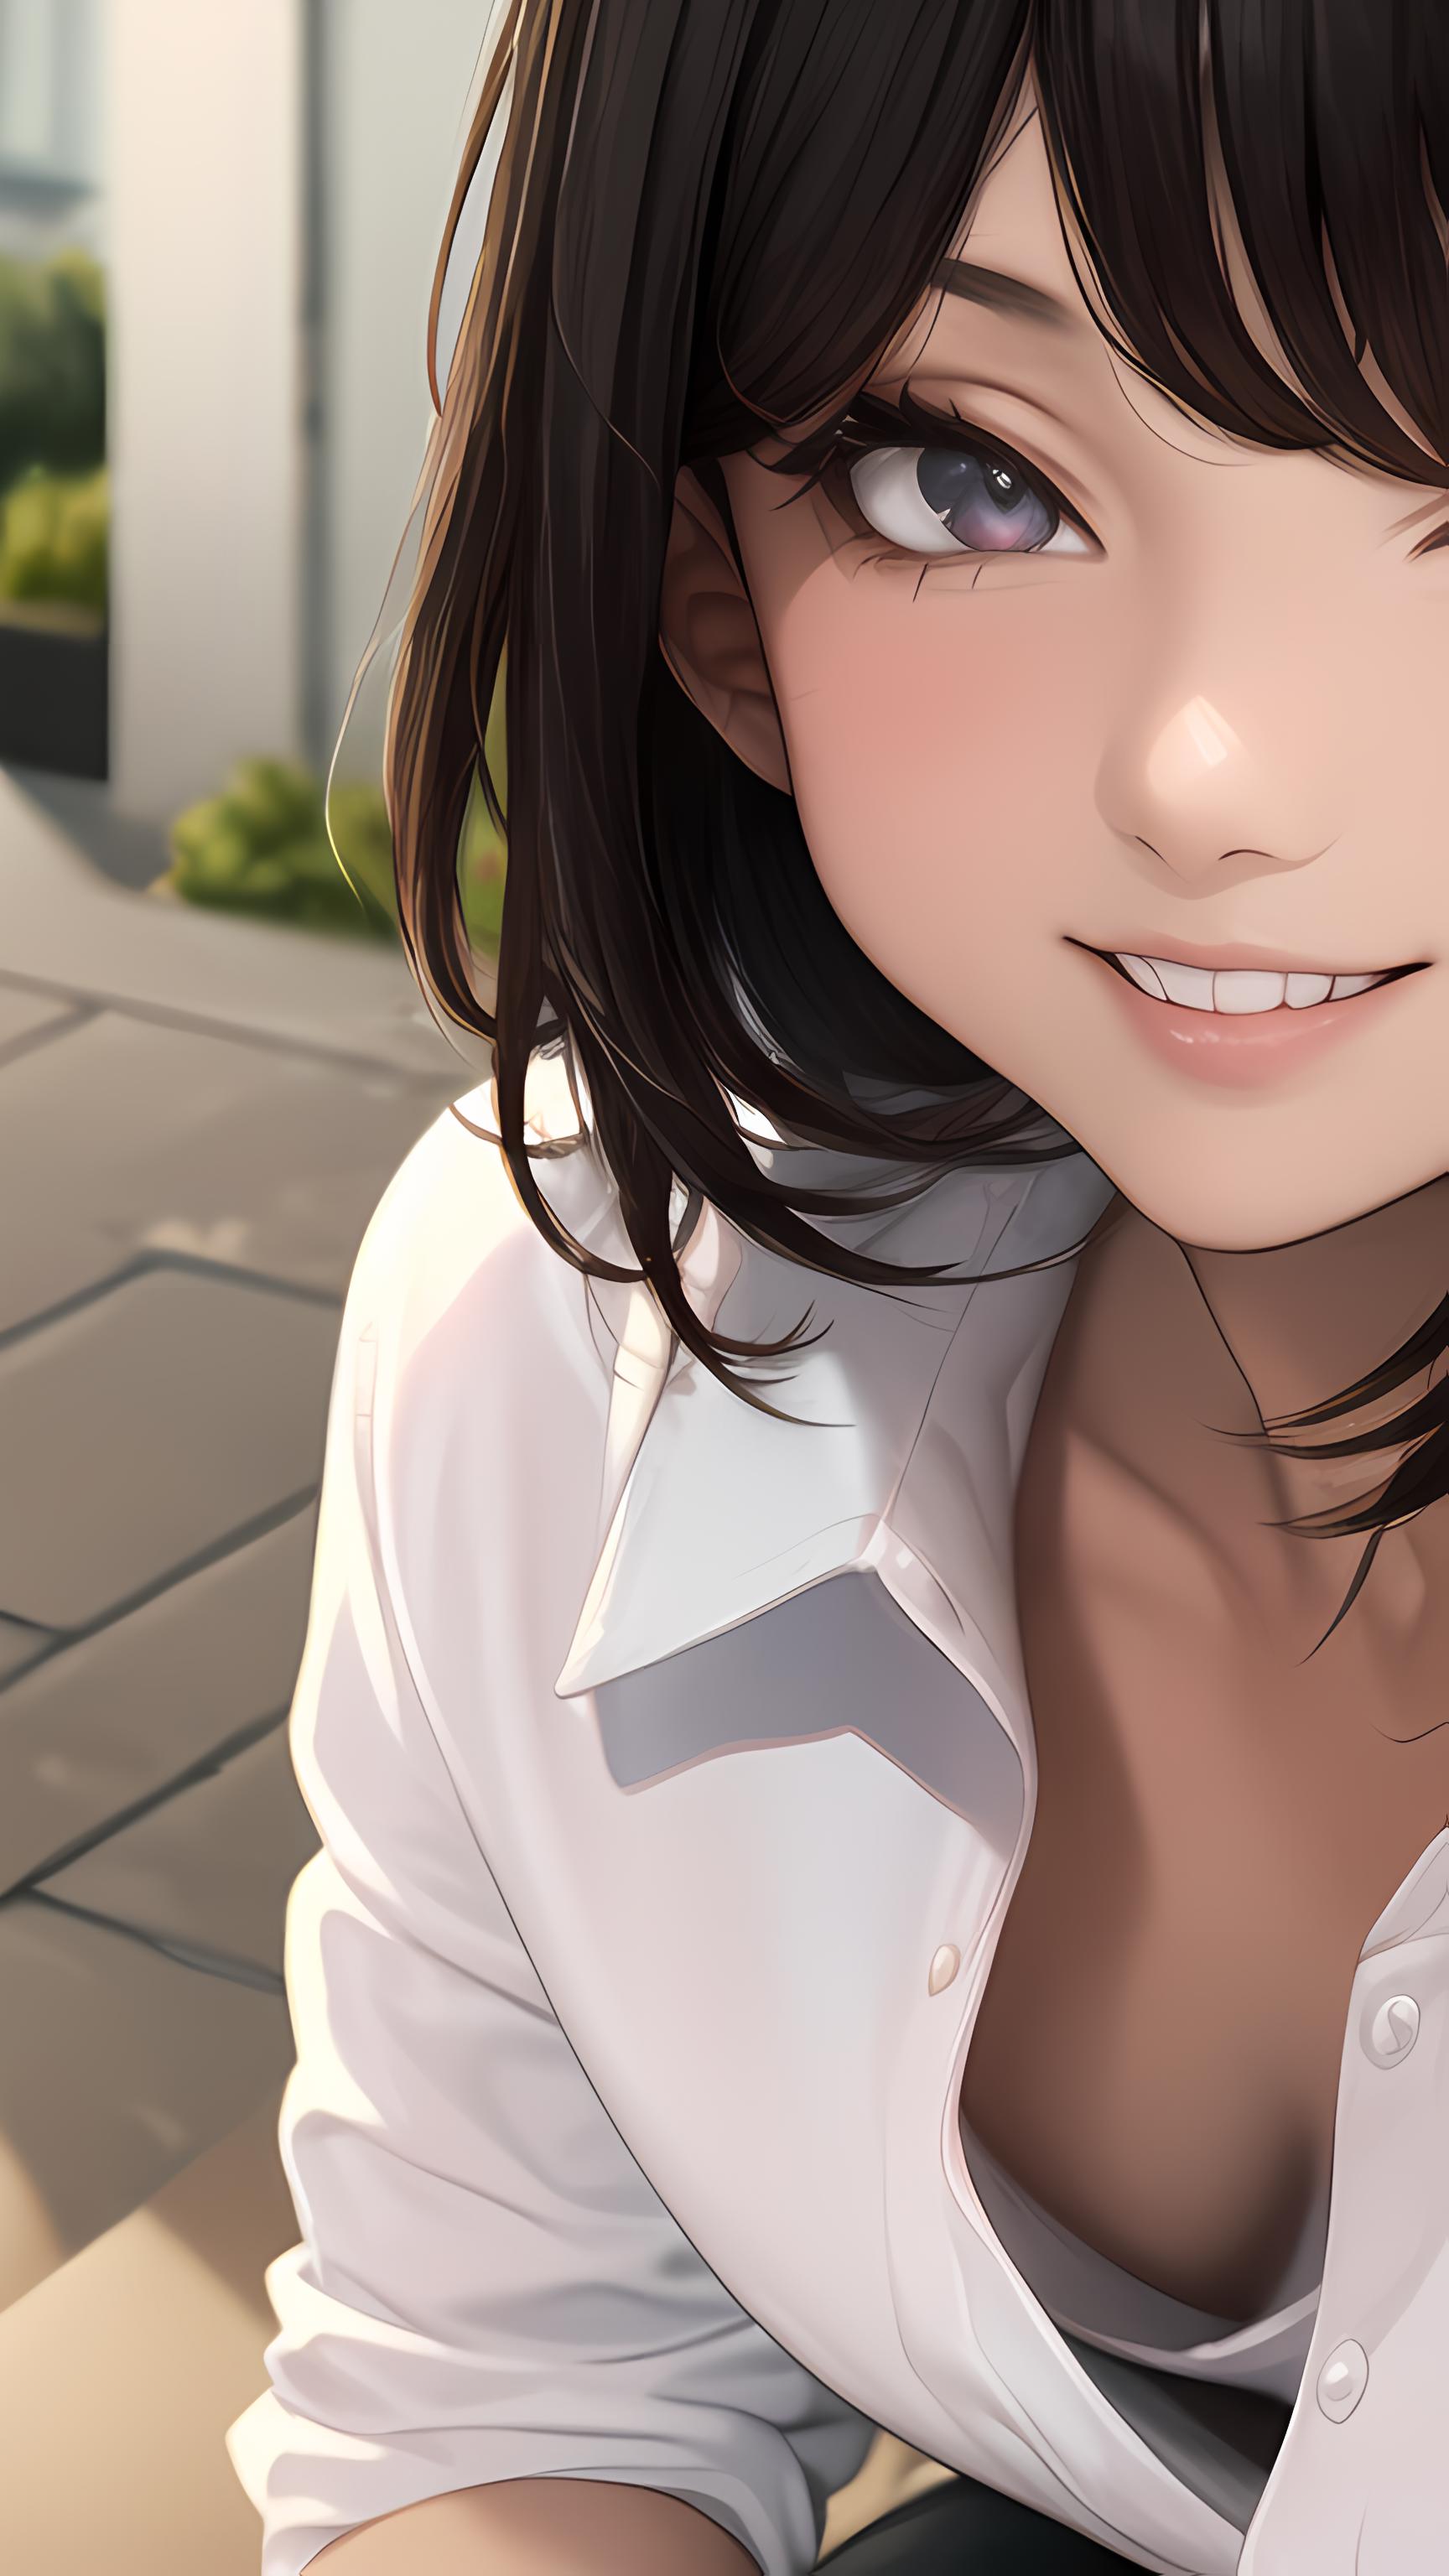 A smiling woman in a white dress shirt.